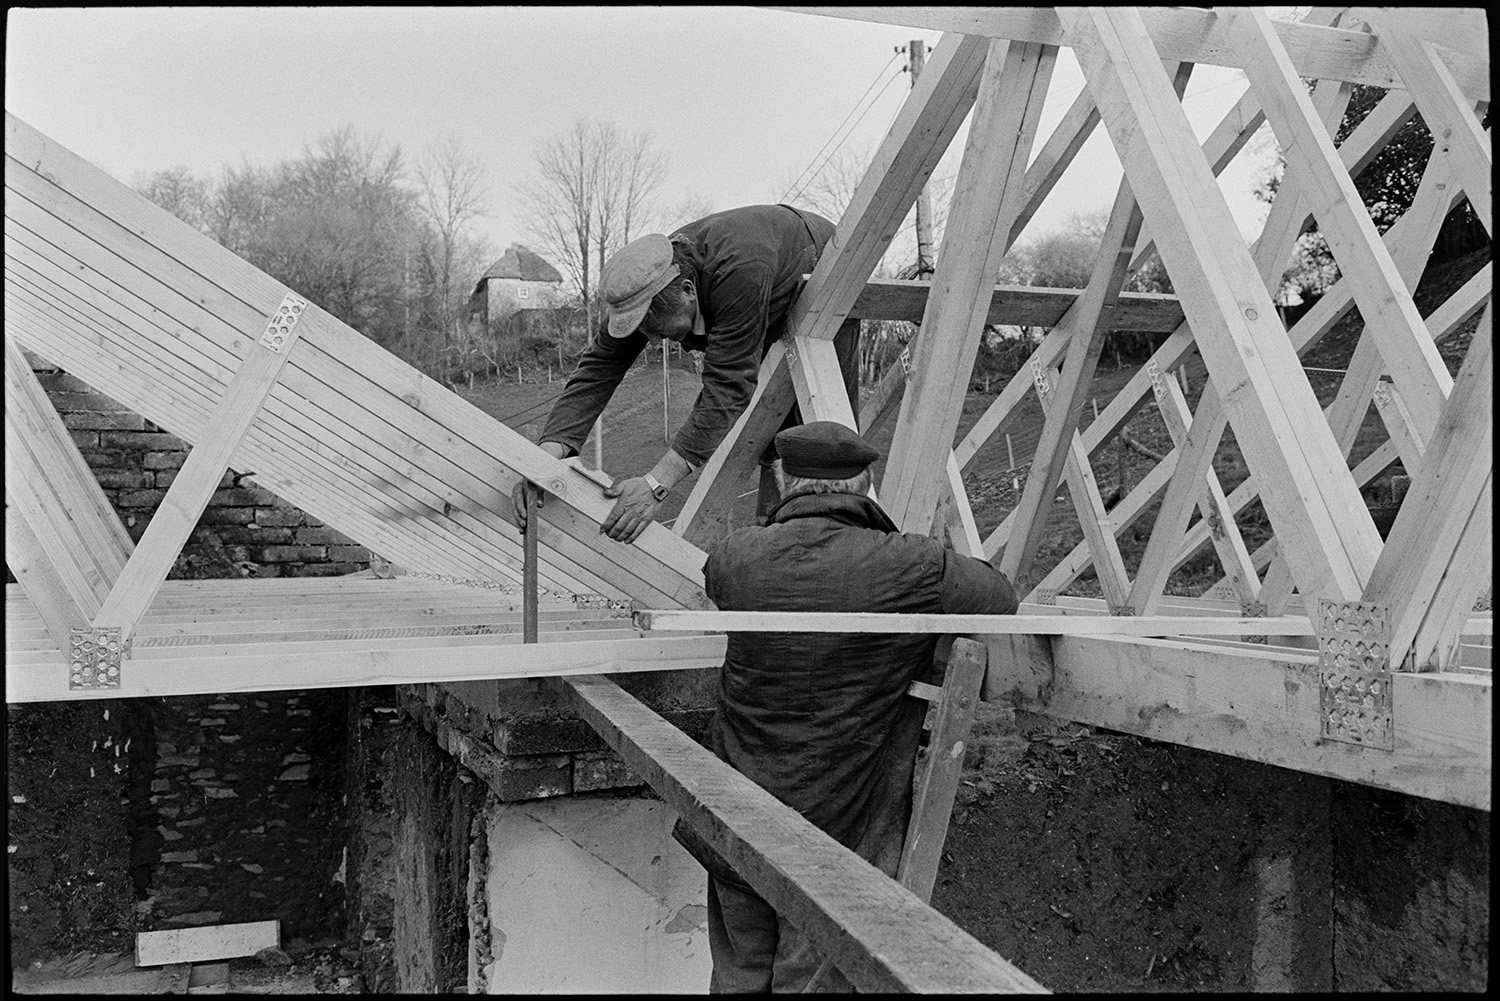 Builder renovating cottage with new roof.
[Two builders renovating a cottage with a new roof at Millhams, Dolton. Wooden roof timbers, cob and brick walls are shown. Trees and a thatched cottage are visible in the background, through the roof timbers.]